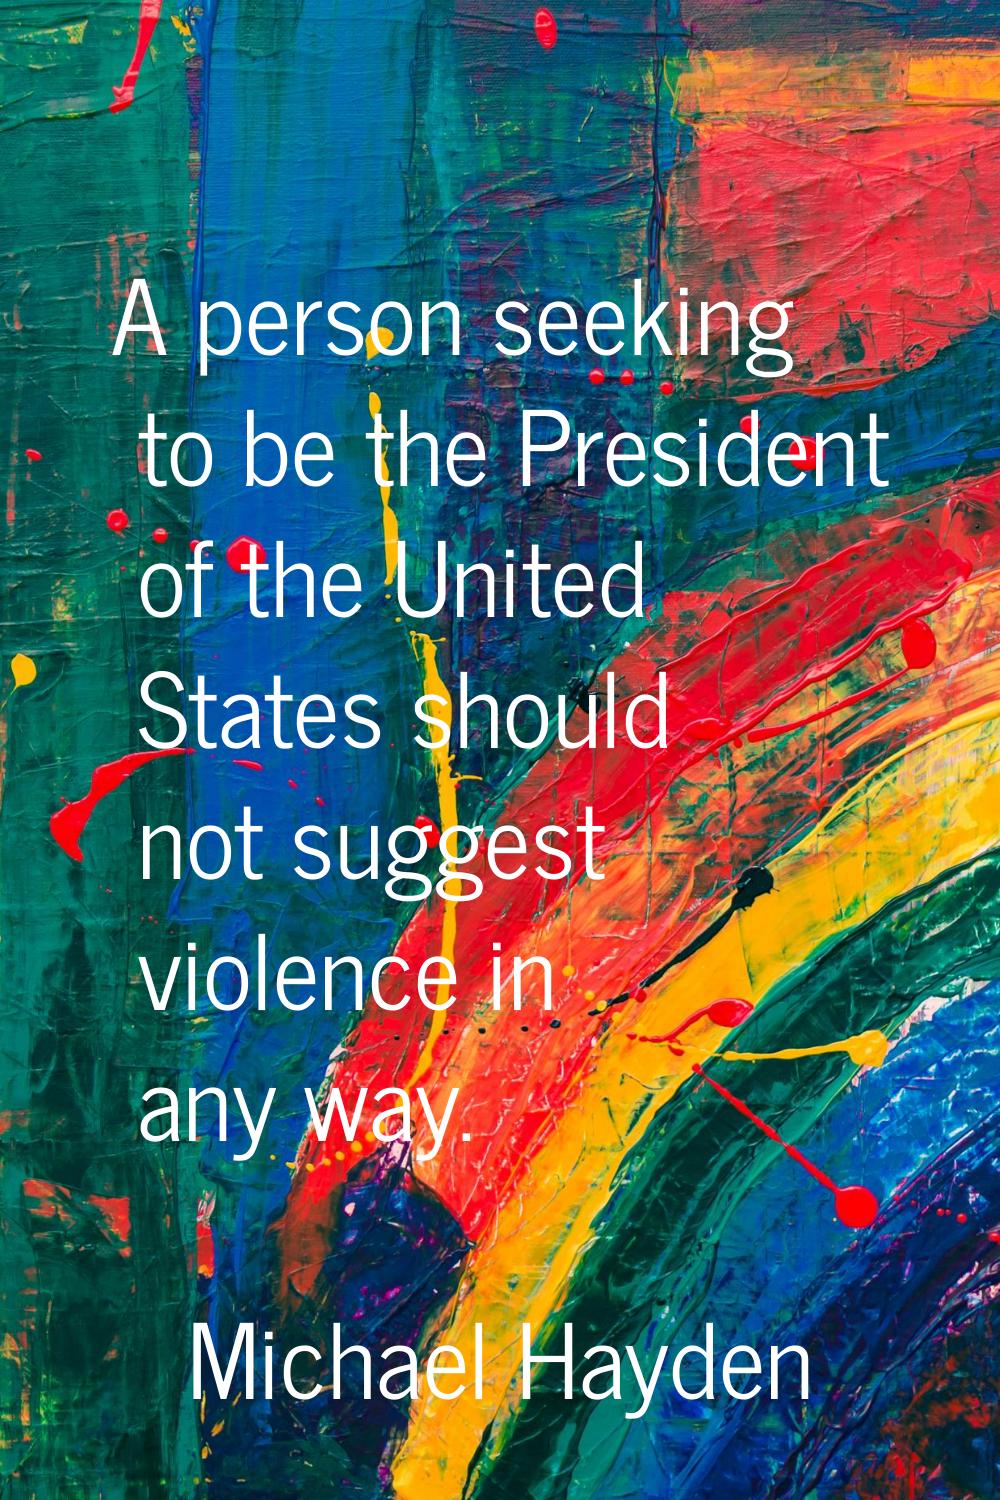 A person seeking to be the President of the United States should not suggest violence in any way.